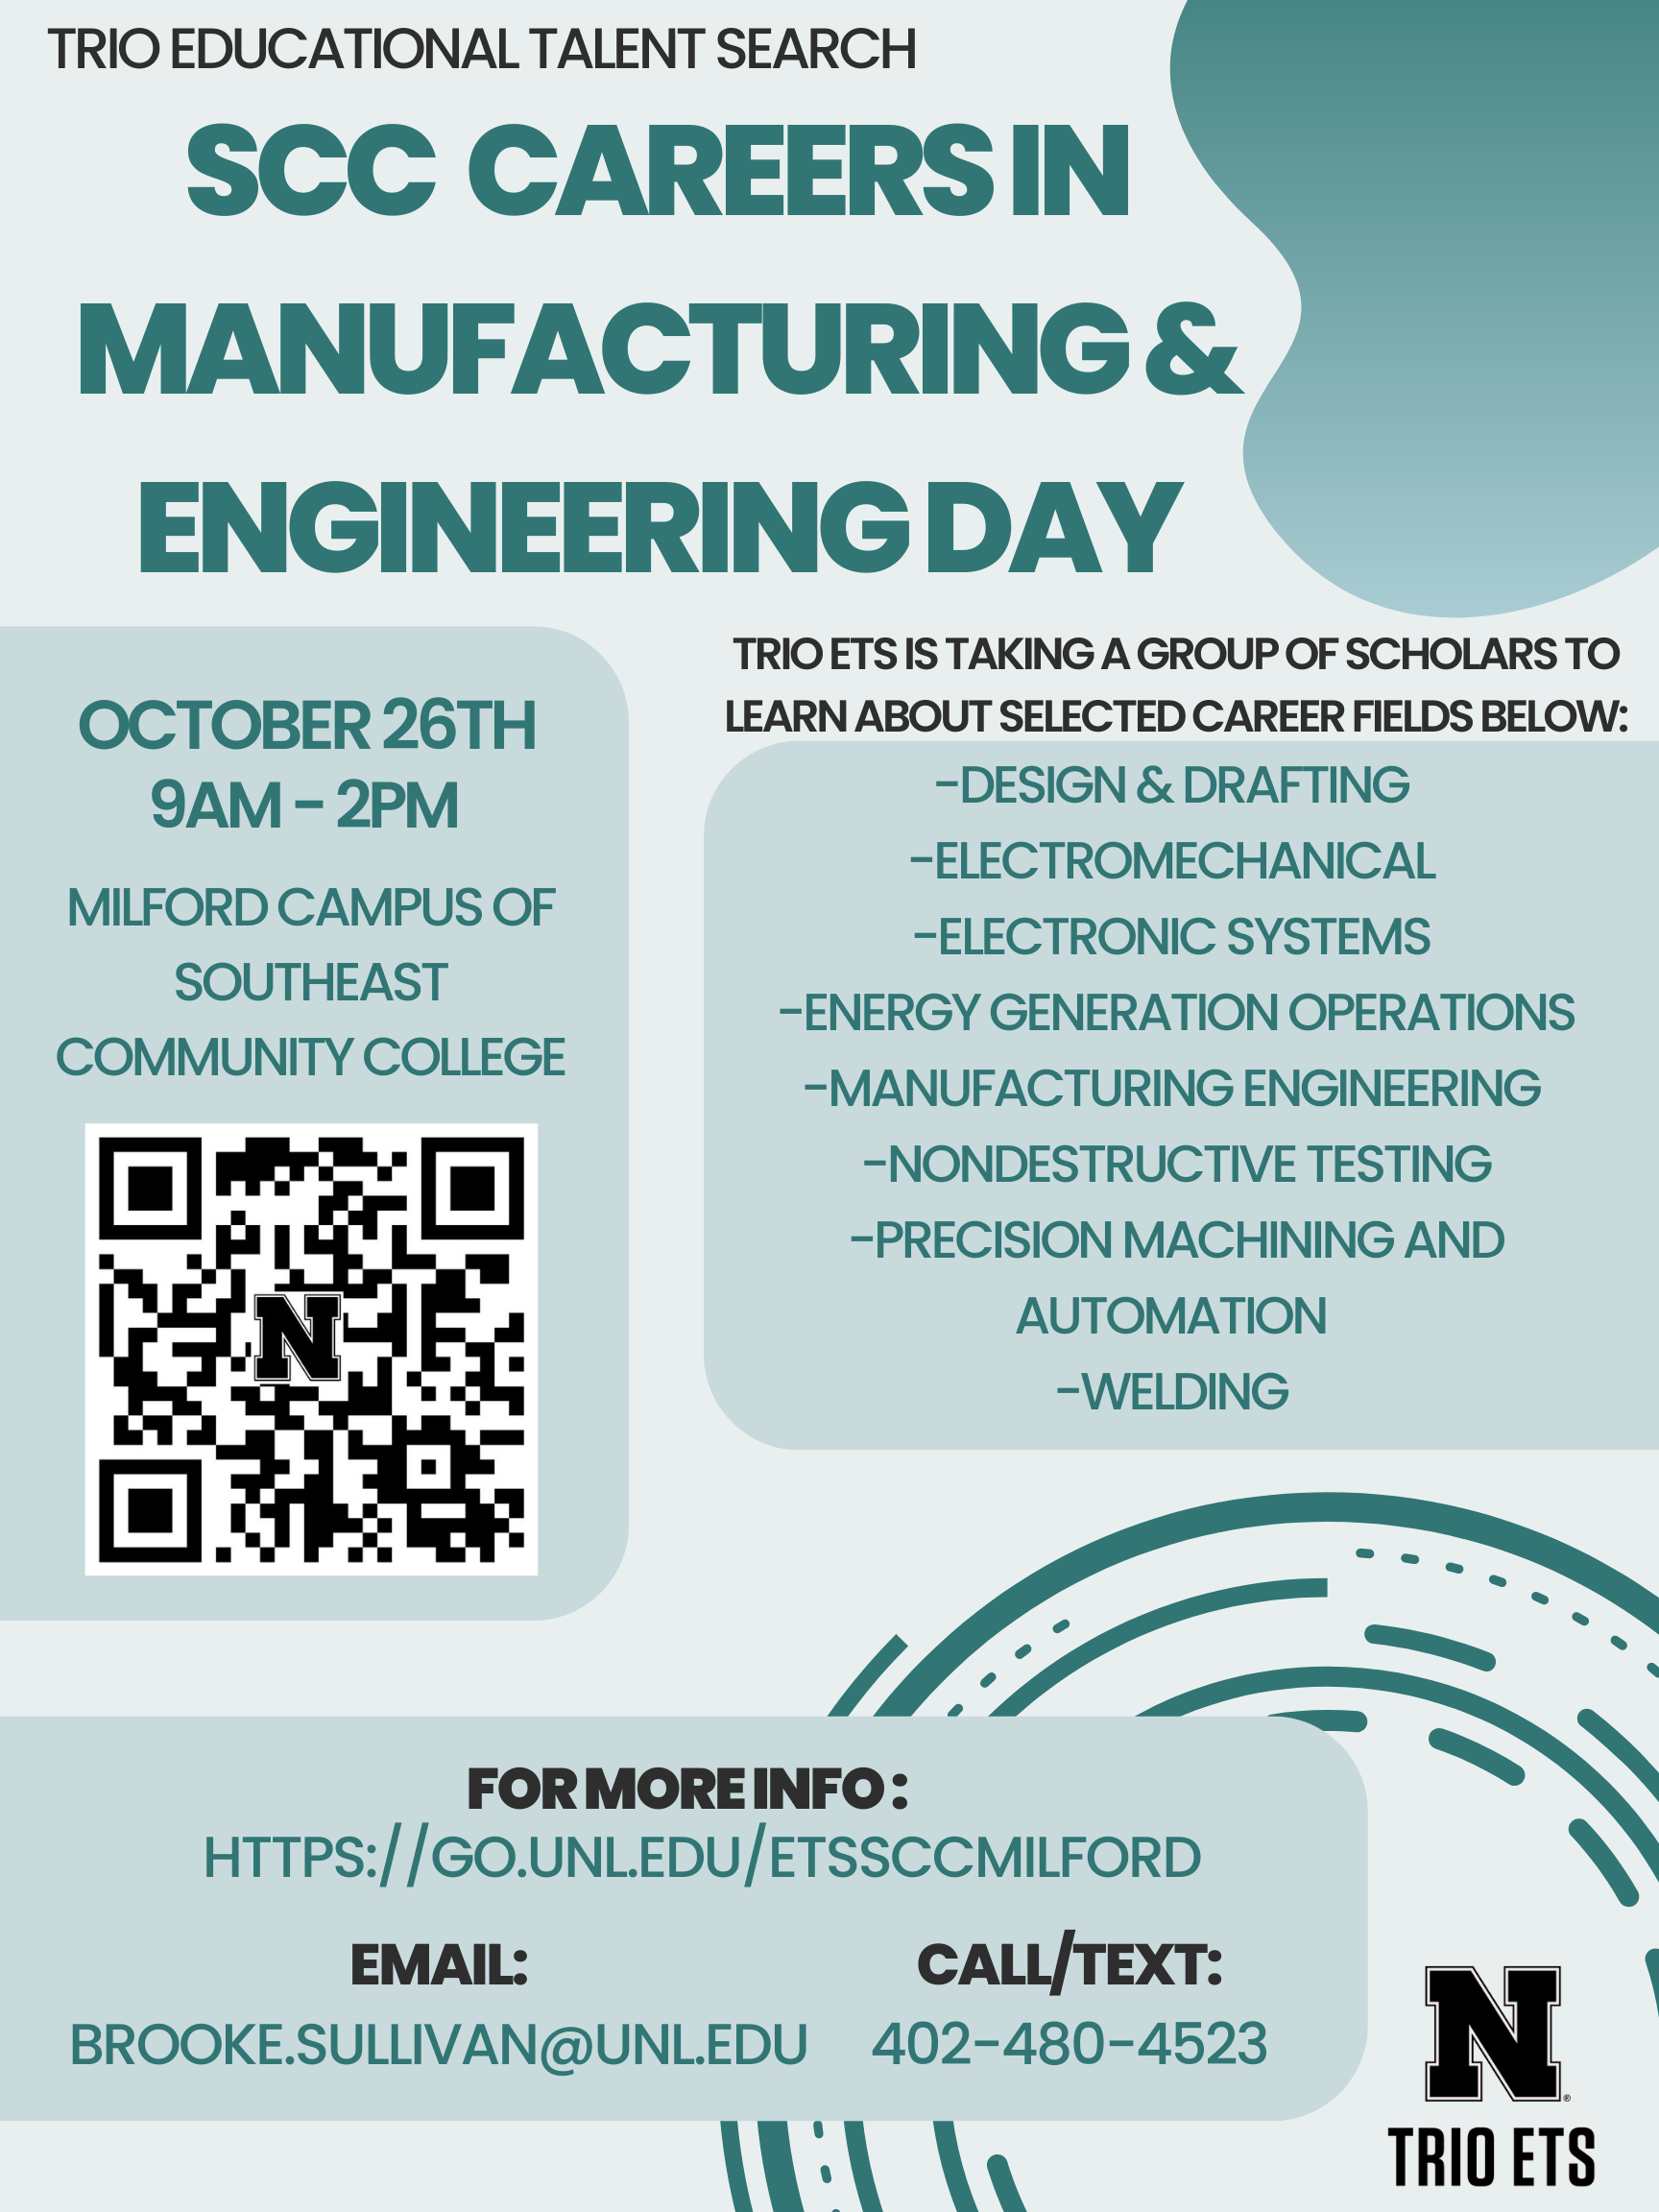 Careers in Manufacturing and Engineering Day